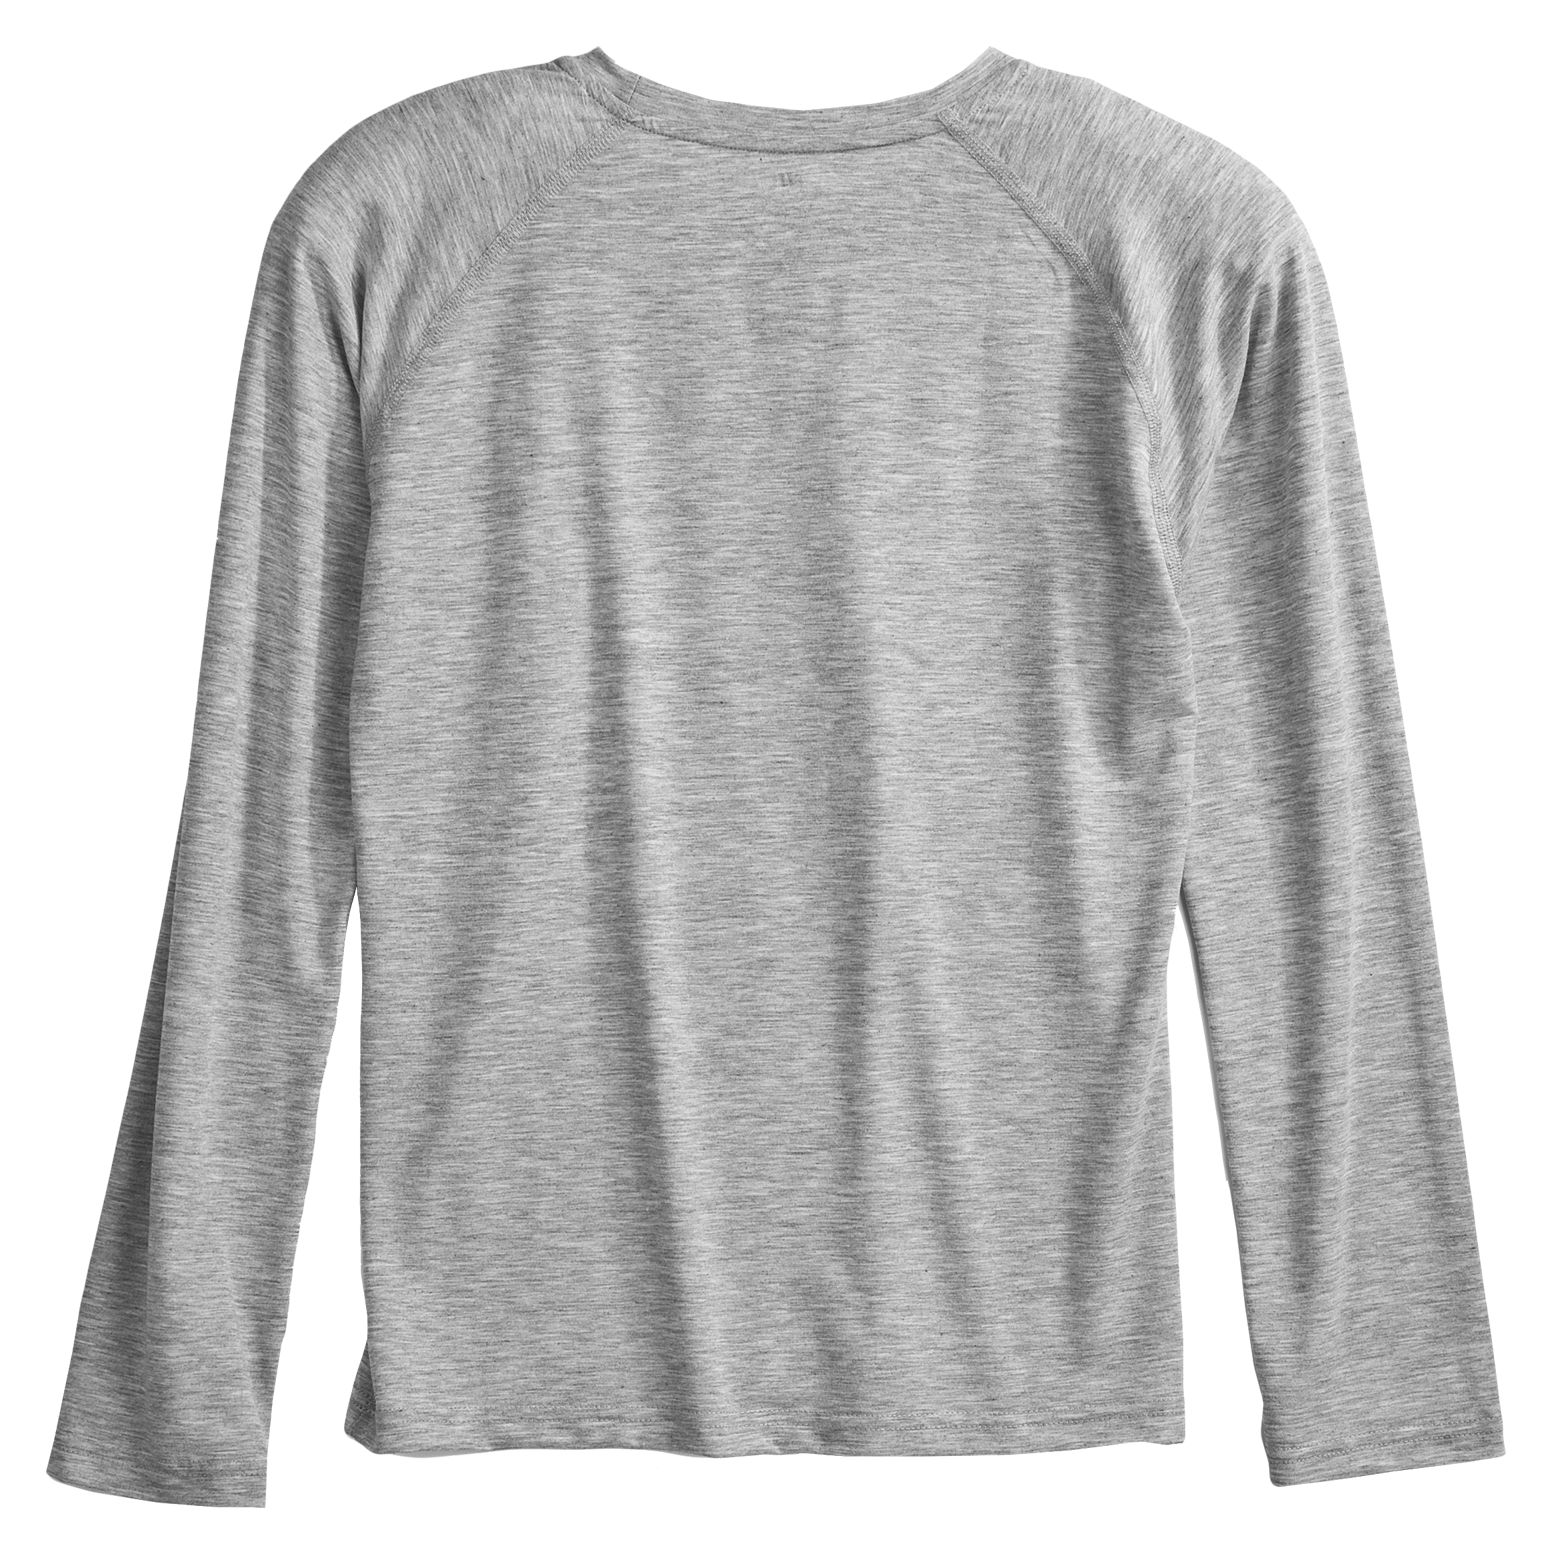 Youth LS Tech Tee, Heather Grey image number 1